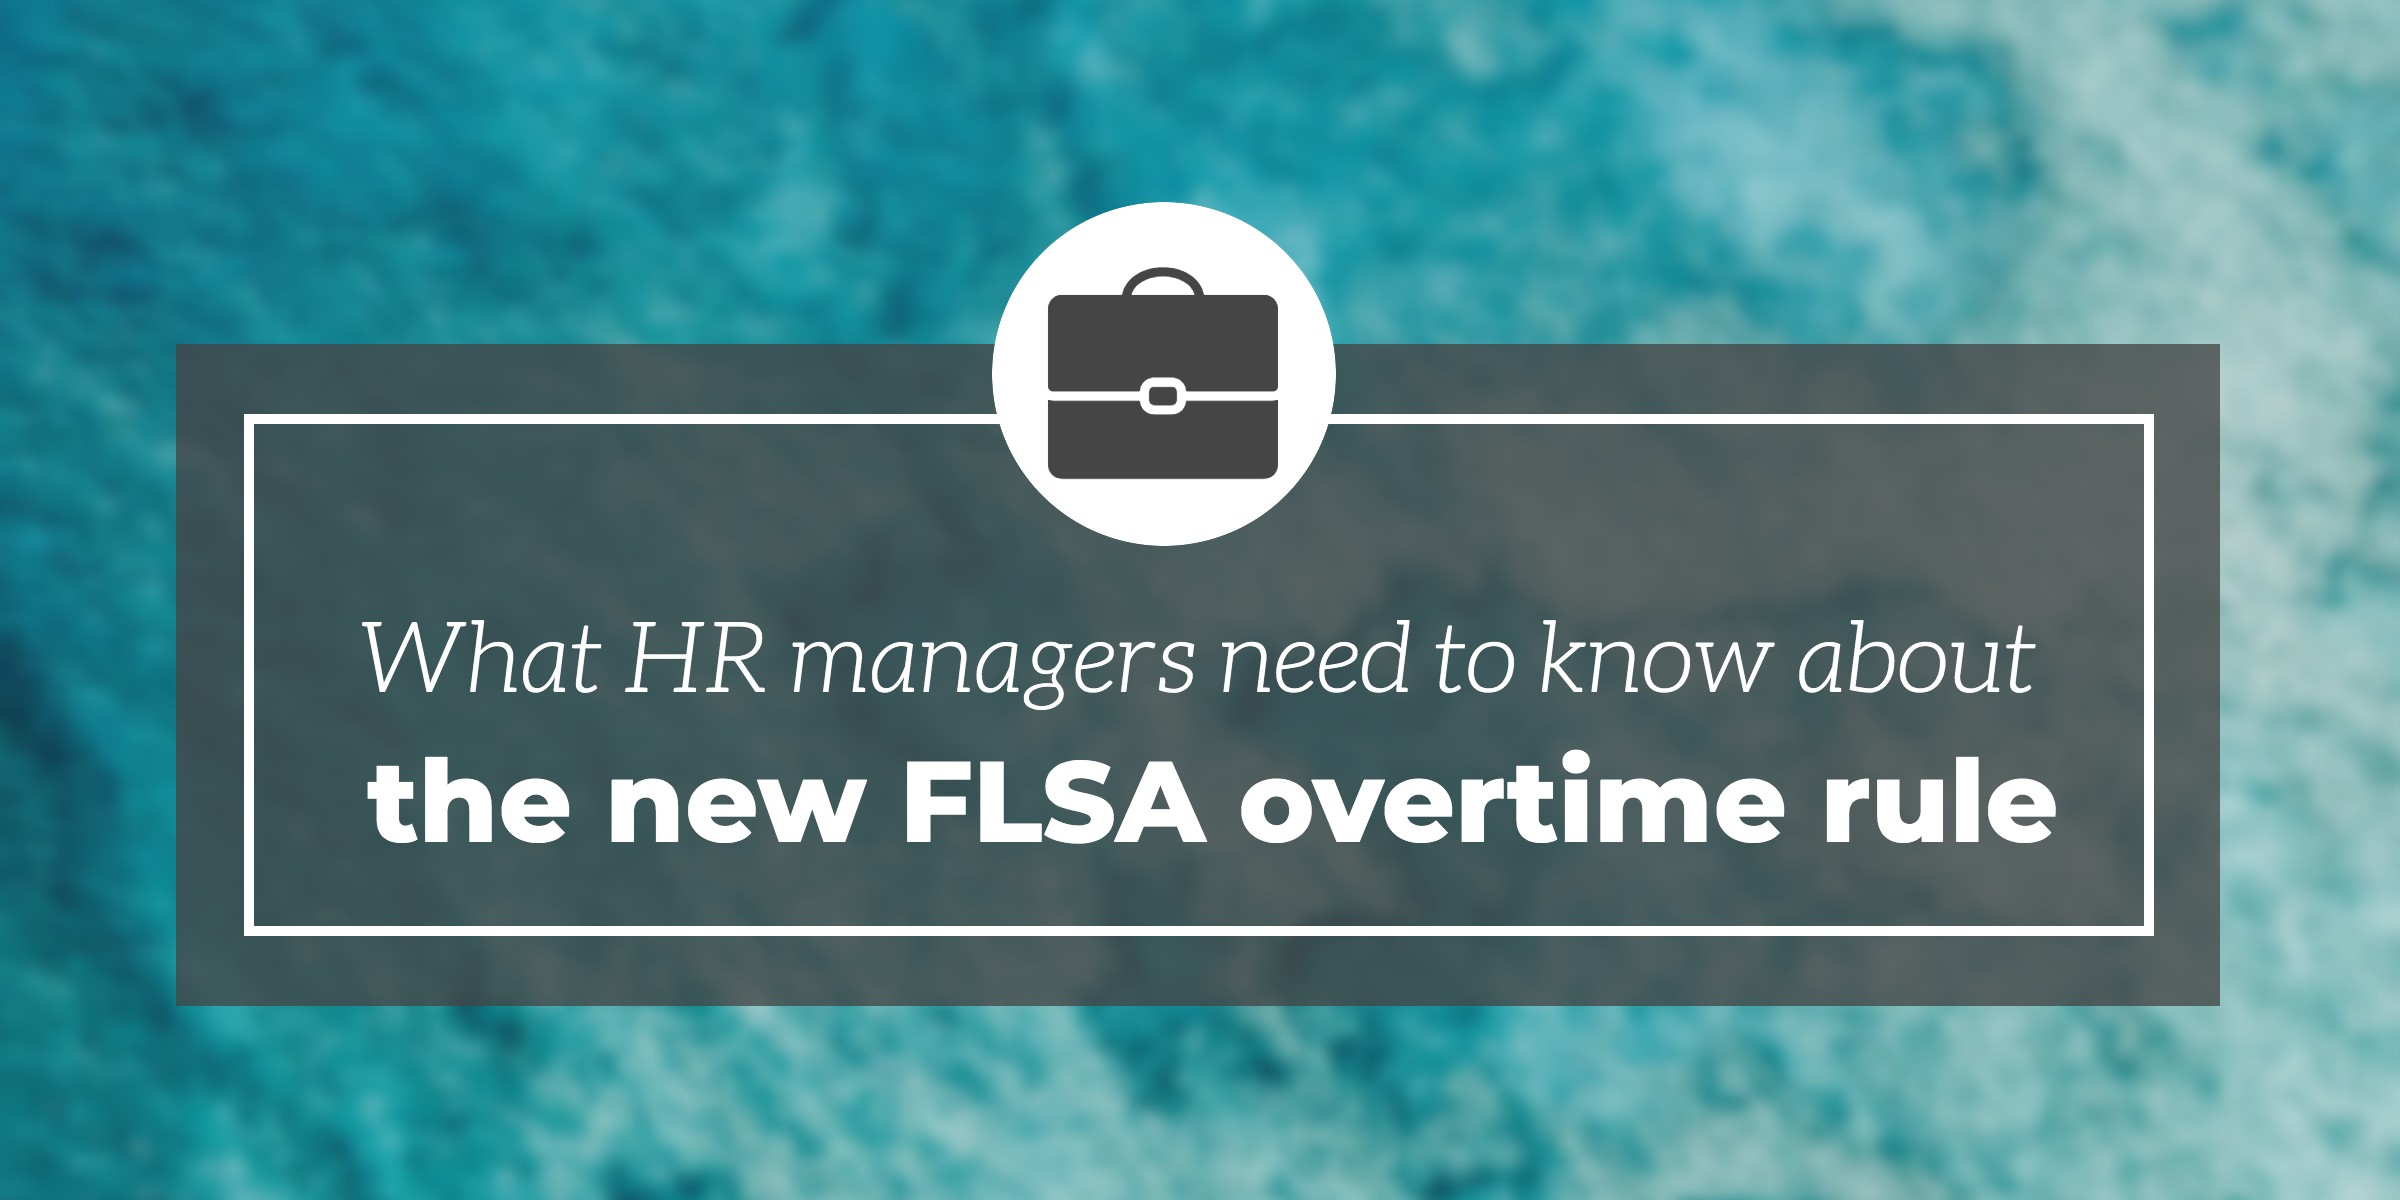 What HR managers need to know about the new FLSA overtime rule